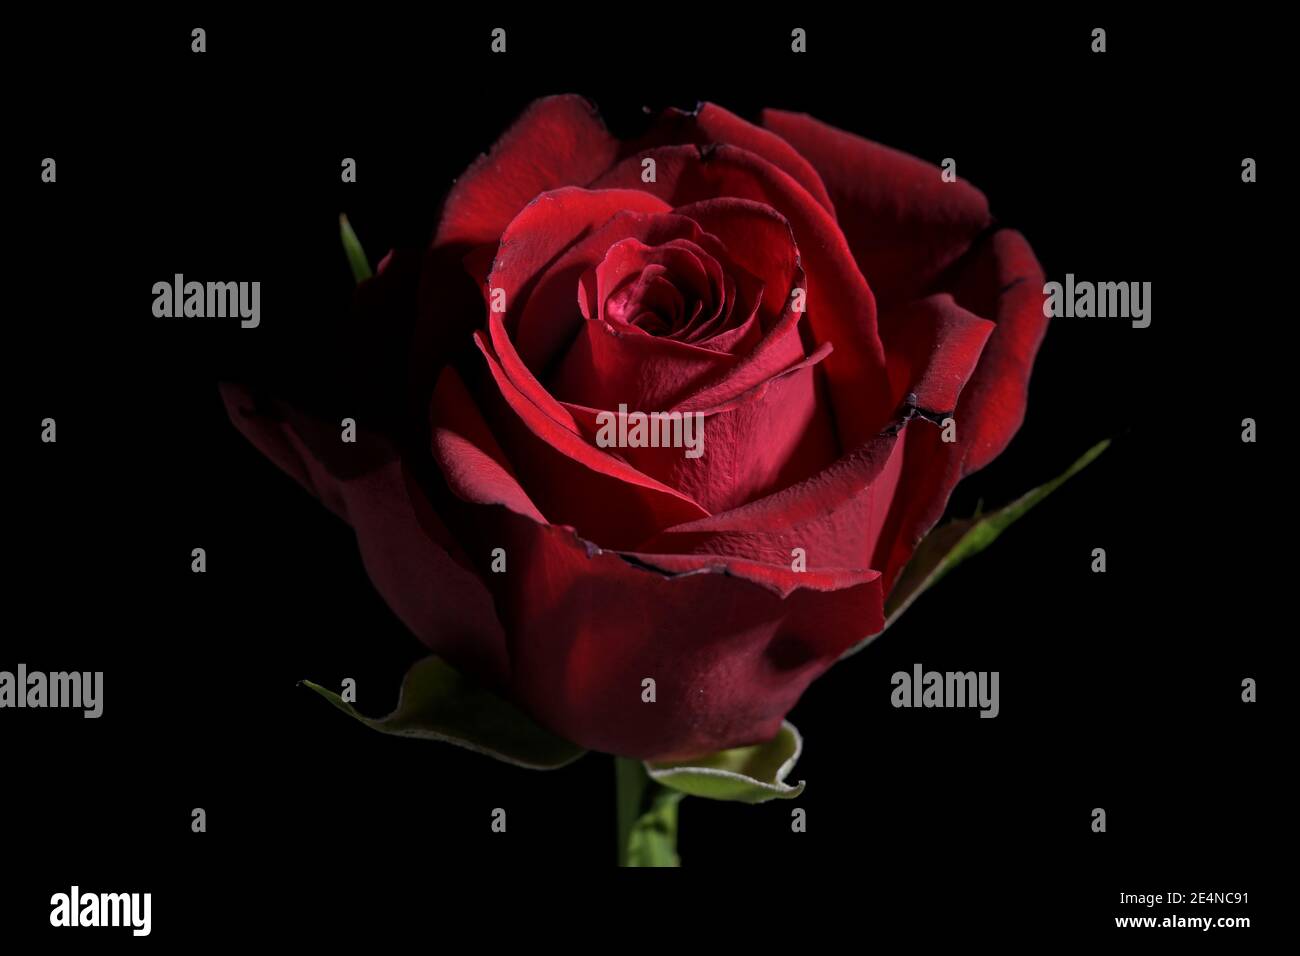 Dark red rose flower against a black background with copy space,  traditional love symbol, selected focus, narrow depth of field Stock Photo  - Alamy